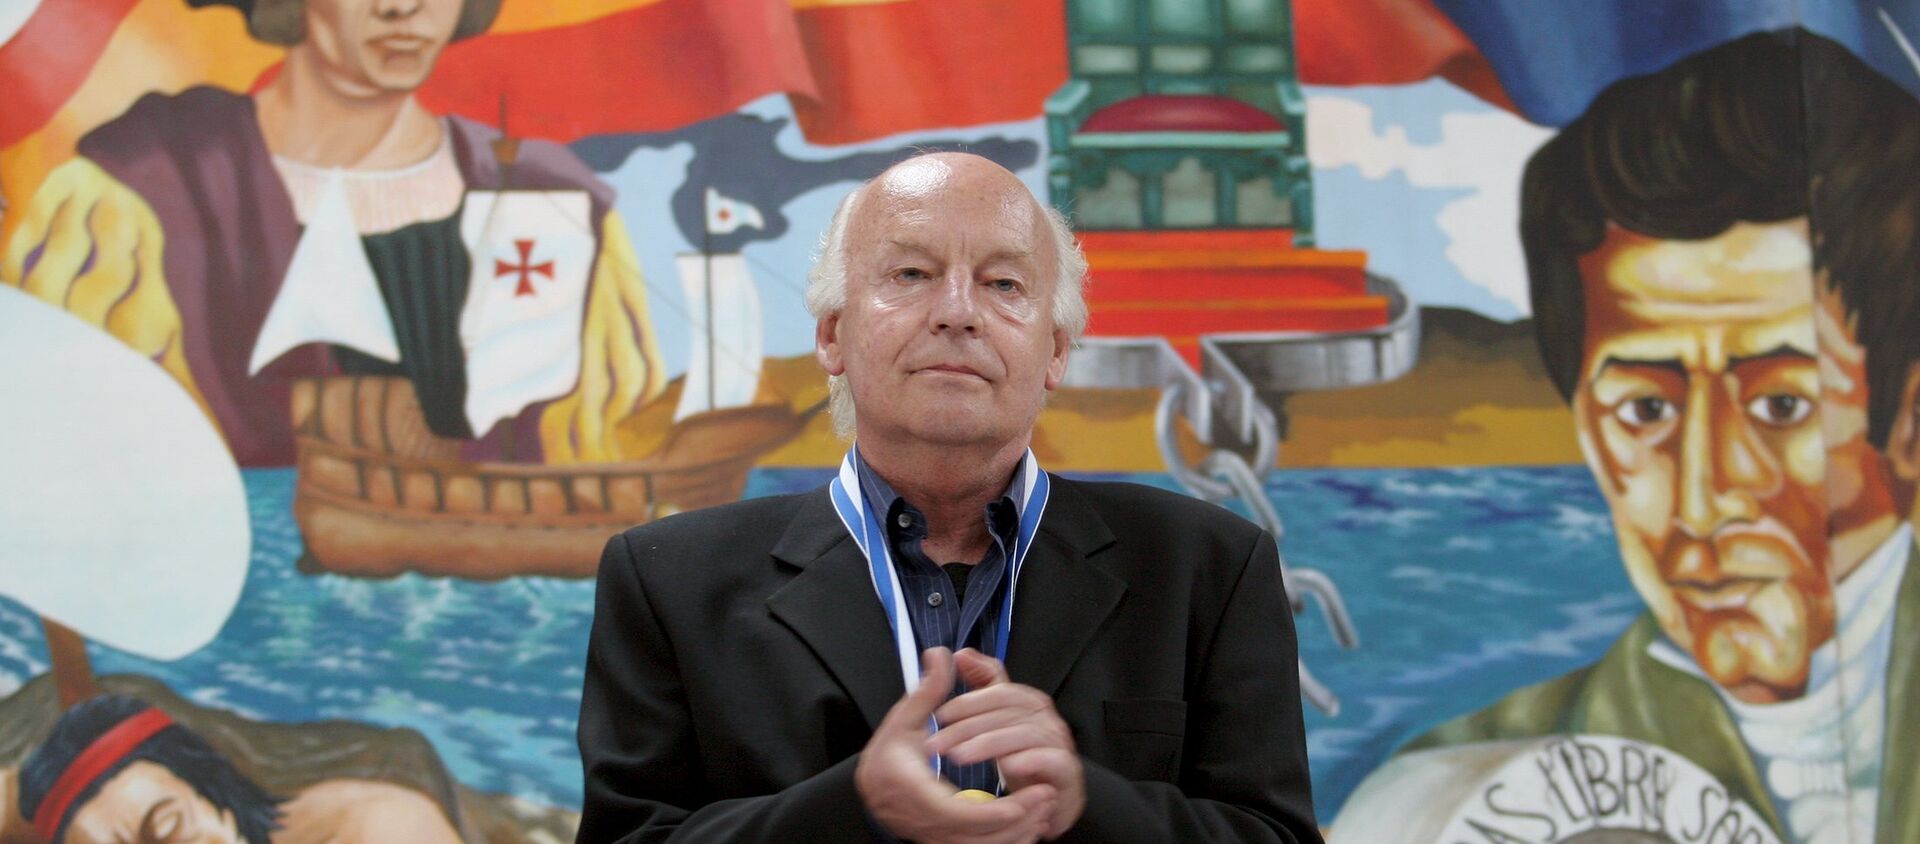 Uruguayan essayist, journalist and historian Eduardo Galeano acknowledges applause at the end of his speech at the National Pedagogical University in Tegucigalpa, in this October 3, 2005 file picture. - Sputnik Mundo, 1920, 03.09.2020